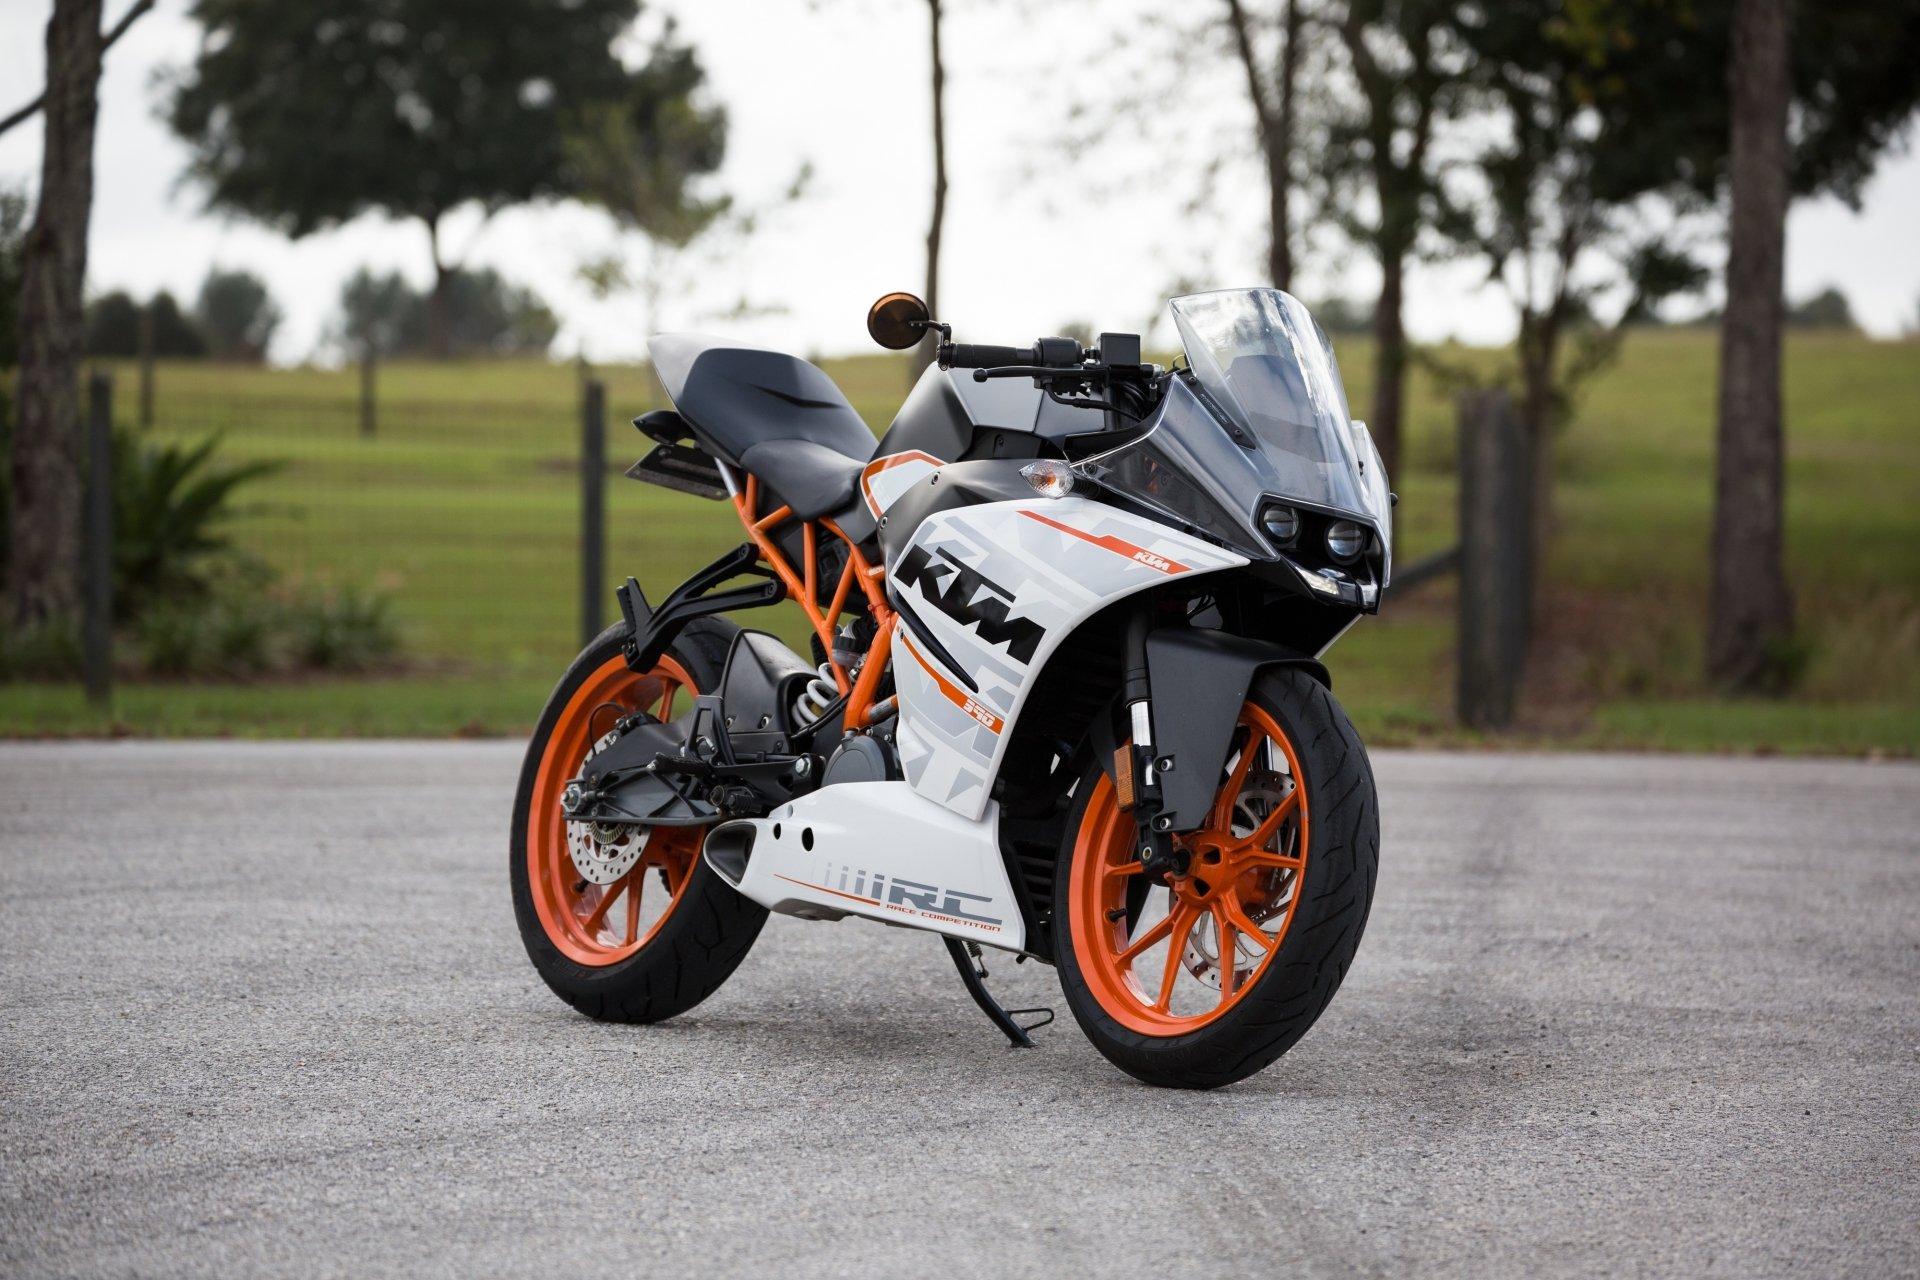 KTM HD Wallpaper and Background Image